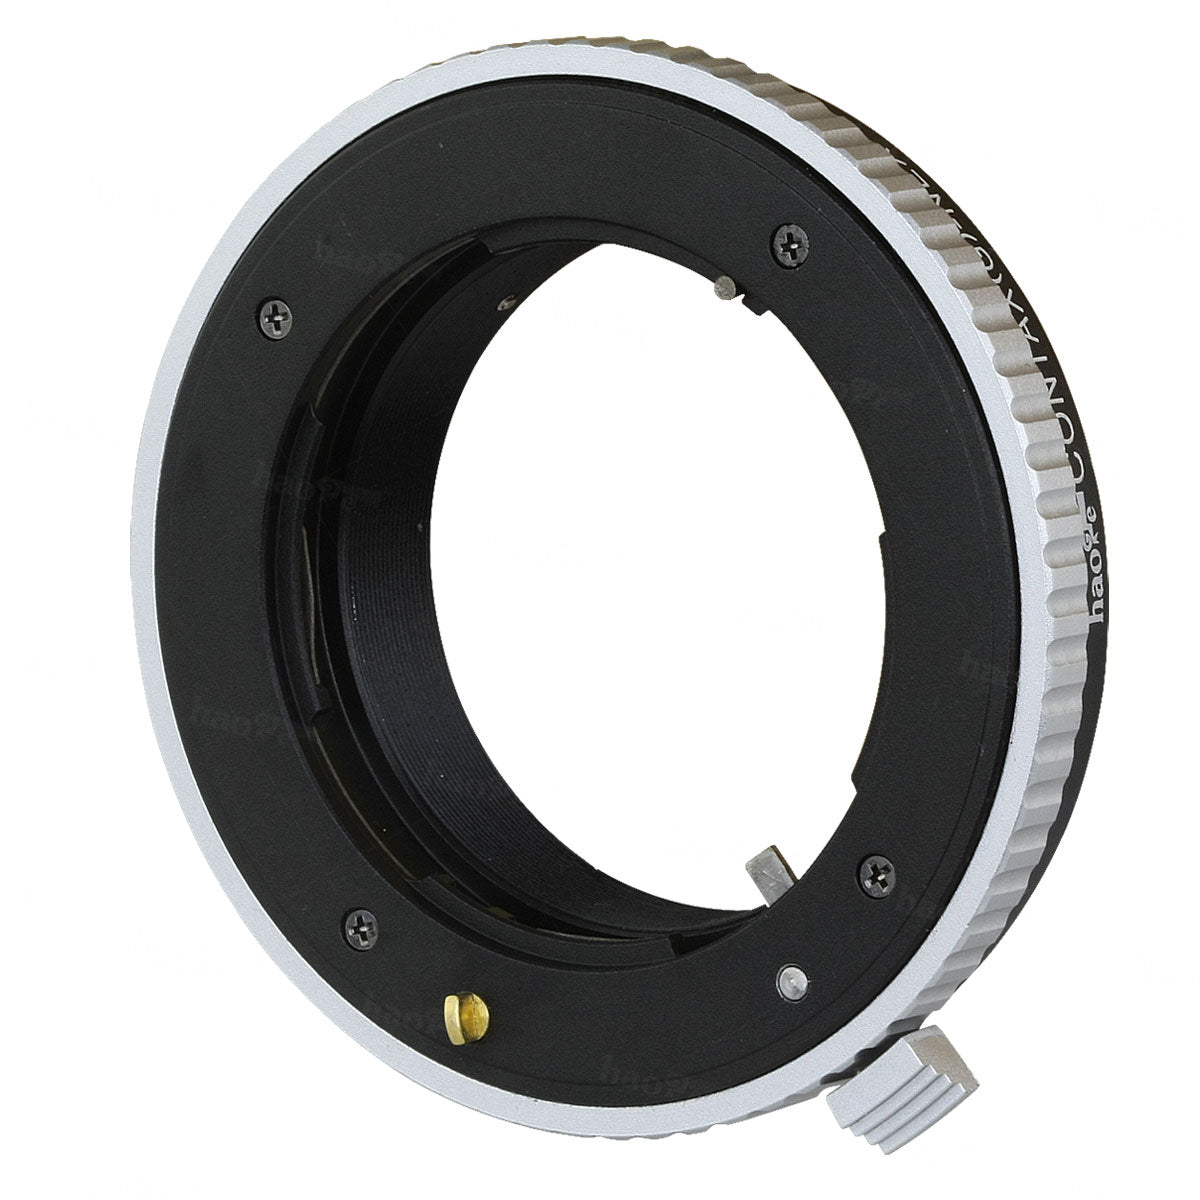 Haoge Lens Mount Adapter for Contax G CYG Mount Lens to Sony E-mount NEX Camera such as NEX-3, NEX-5, NEX-5N, NEX-7, NEX-7N, NEX-C3, NEX-F3, a6300, a6000, a5000, a3500, a3000, NEX-VG10, VG20